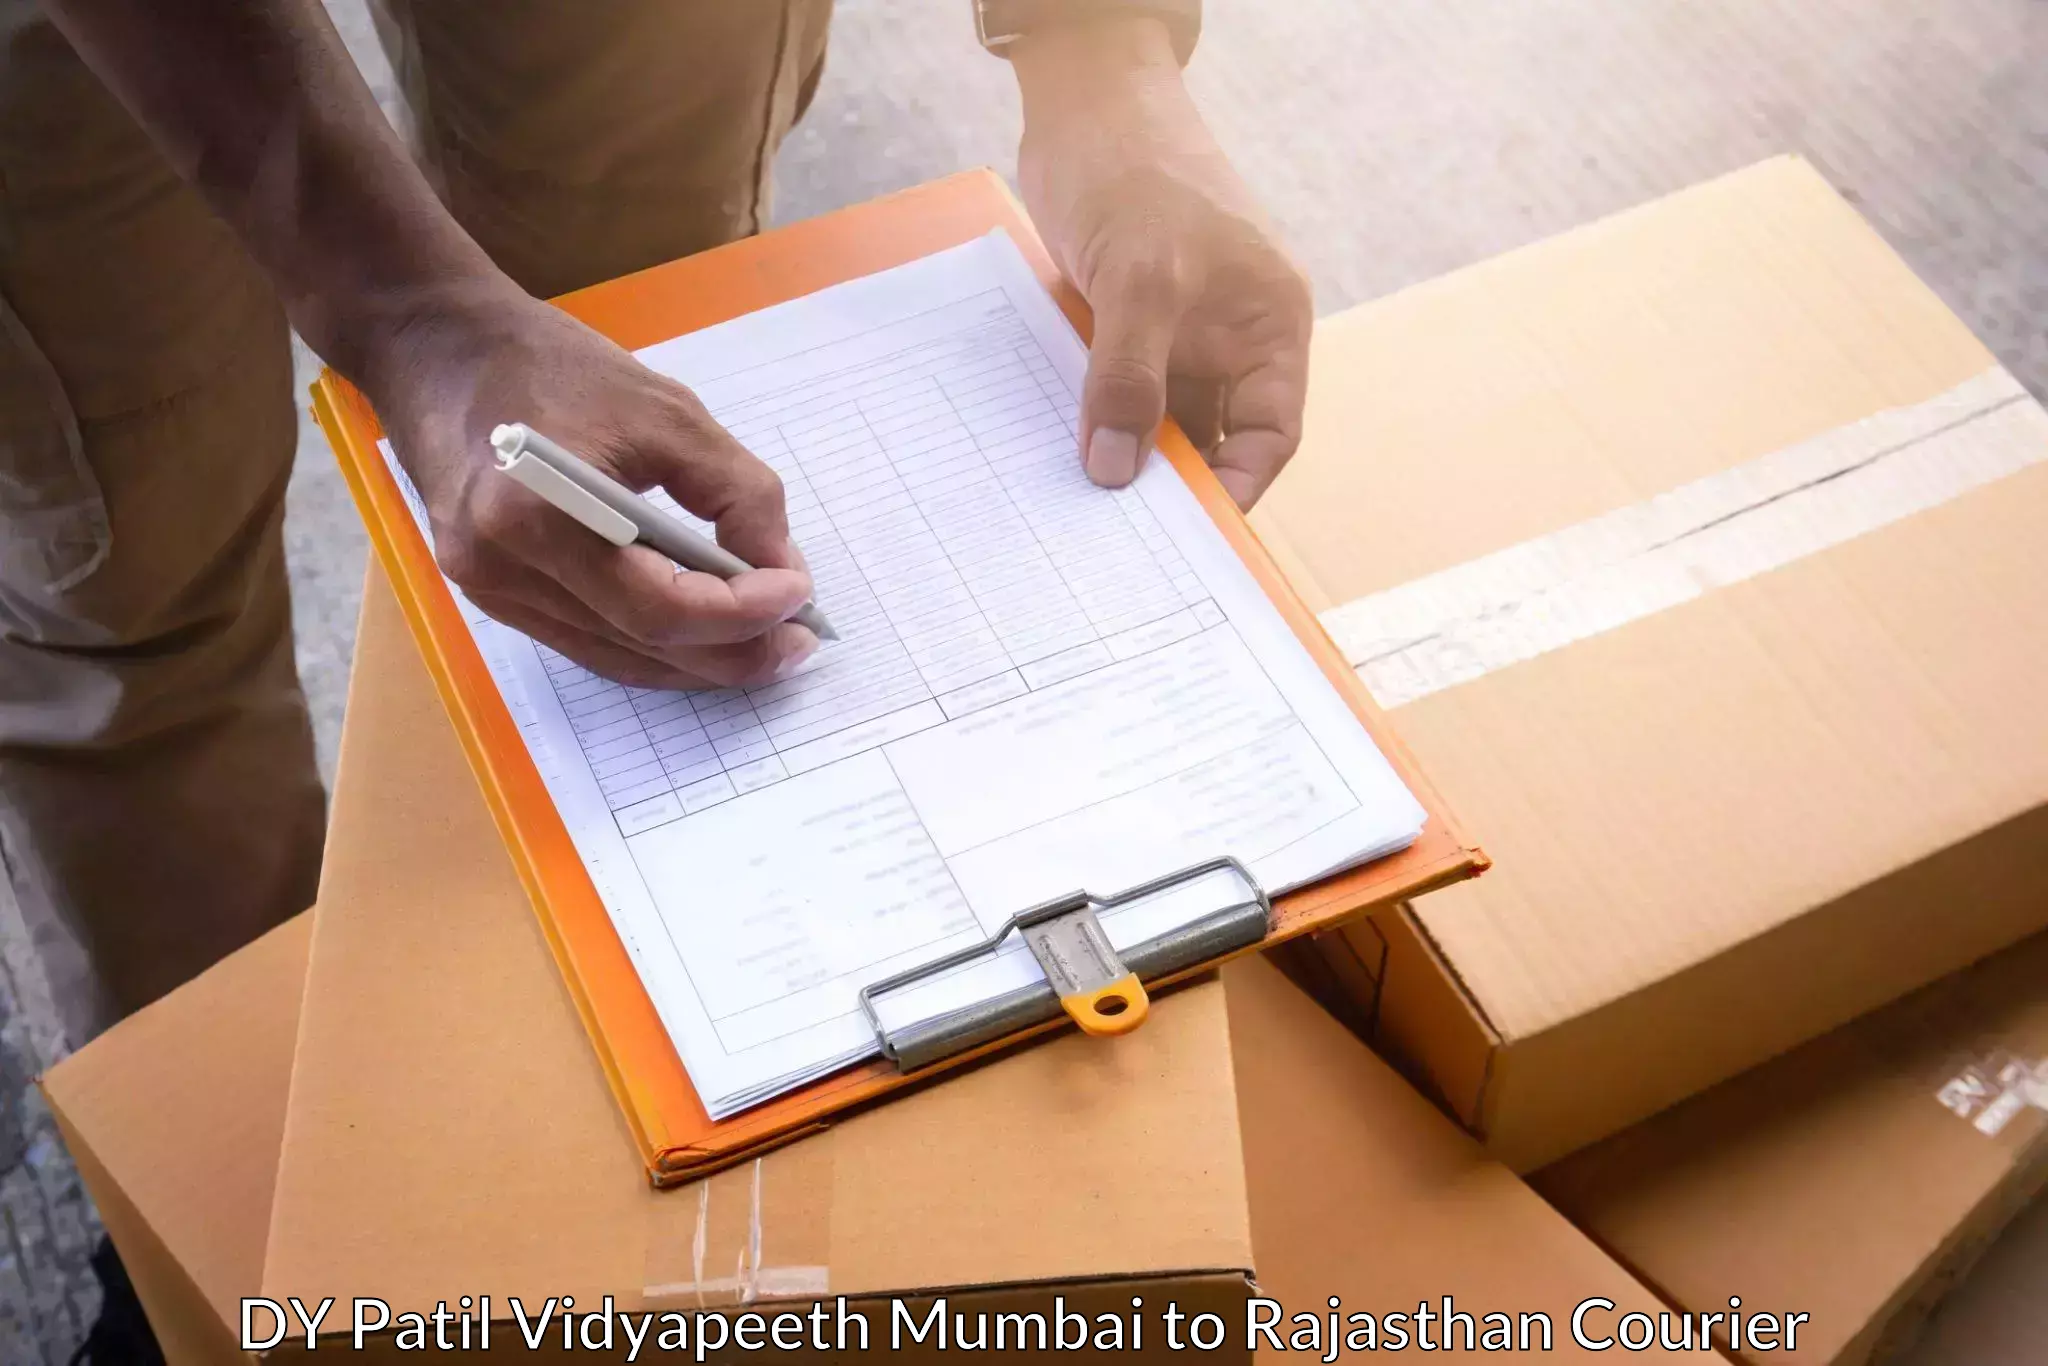 Express mail solutions in DY Patil Vidyapeeth Mumbai to Rajasthan